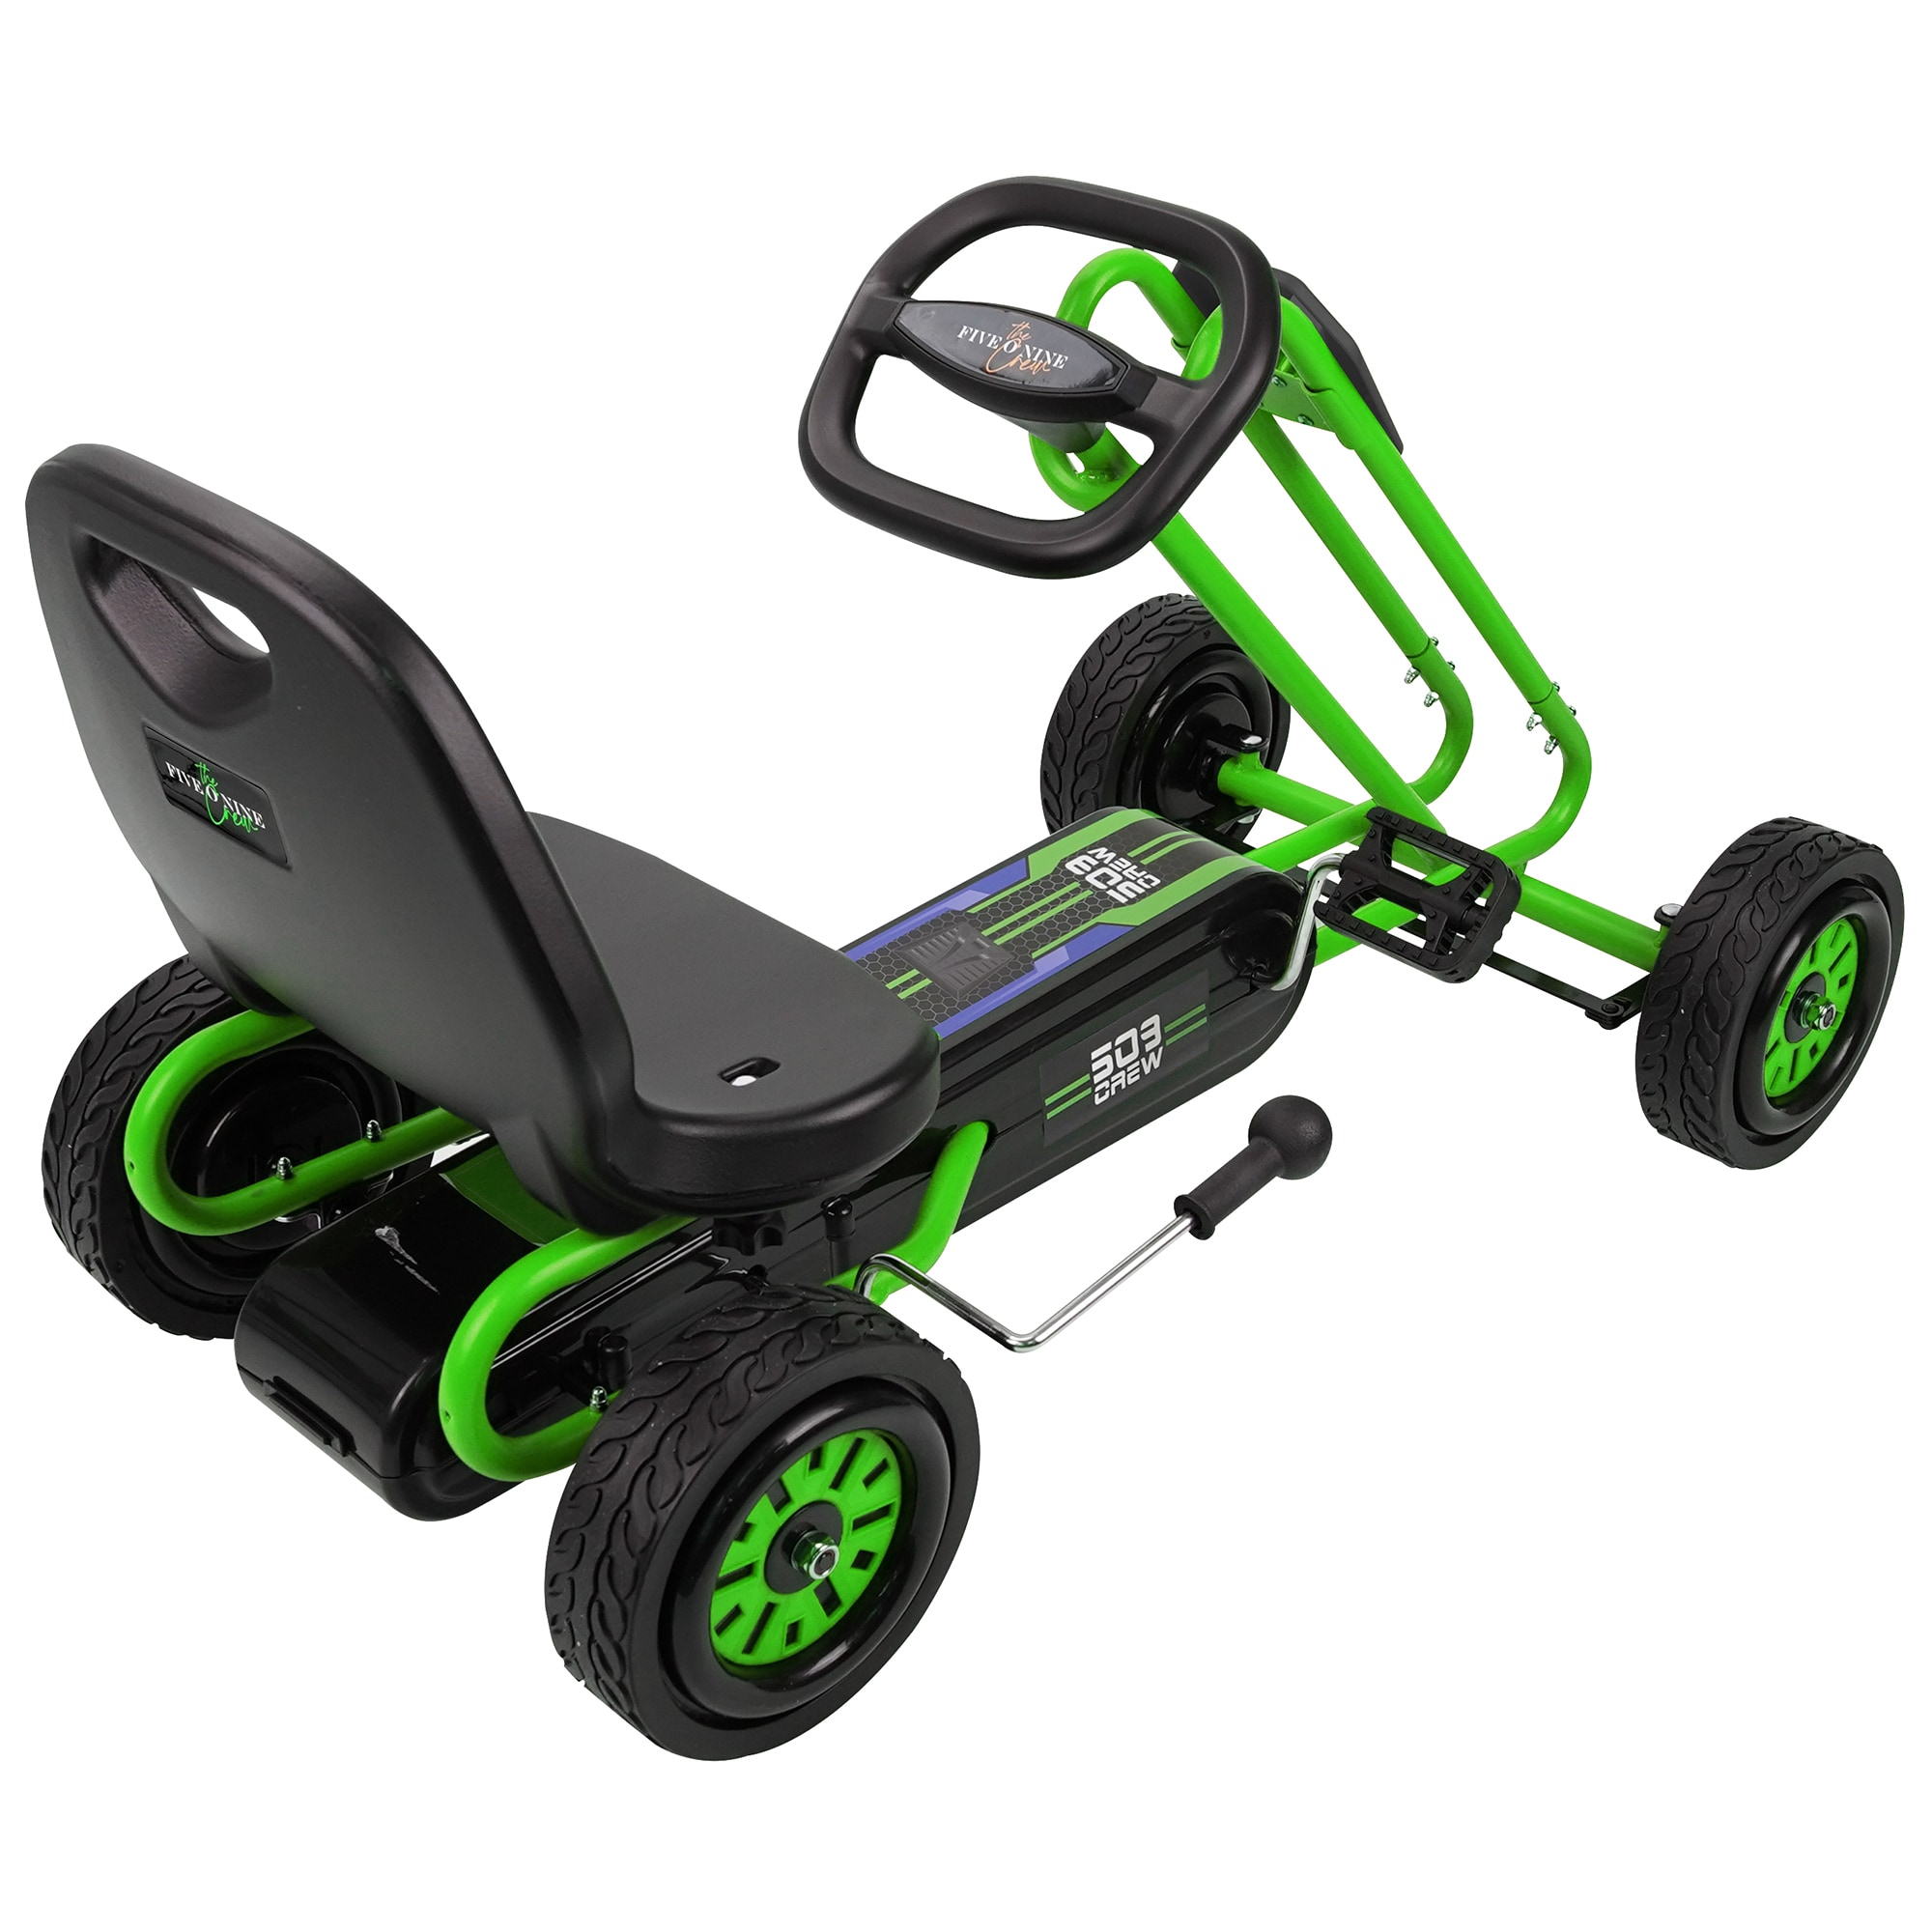 509 Crew Rocket Pedal Go Kart Ride On- Green in the Scooters department at